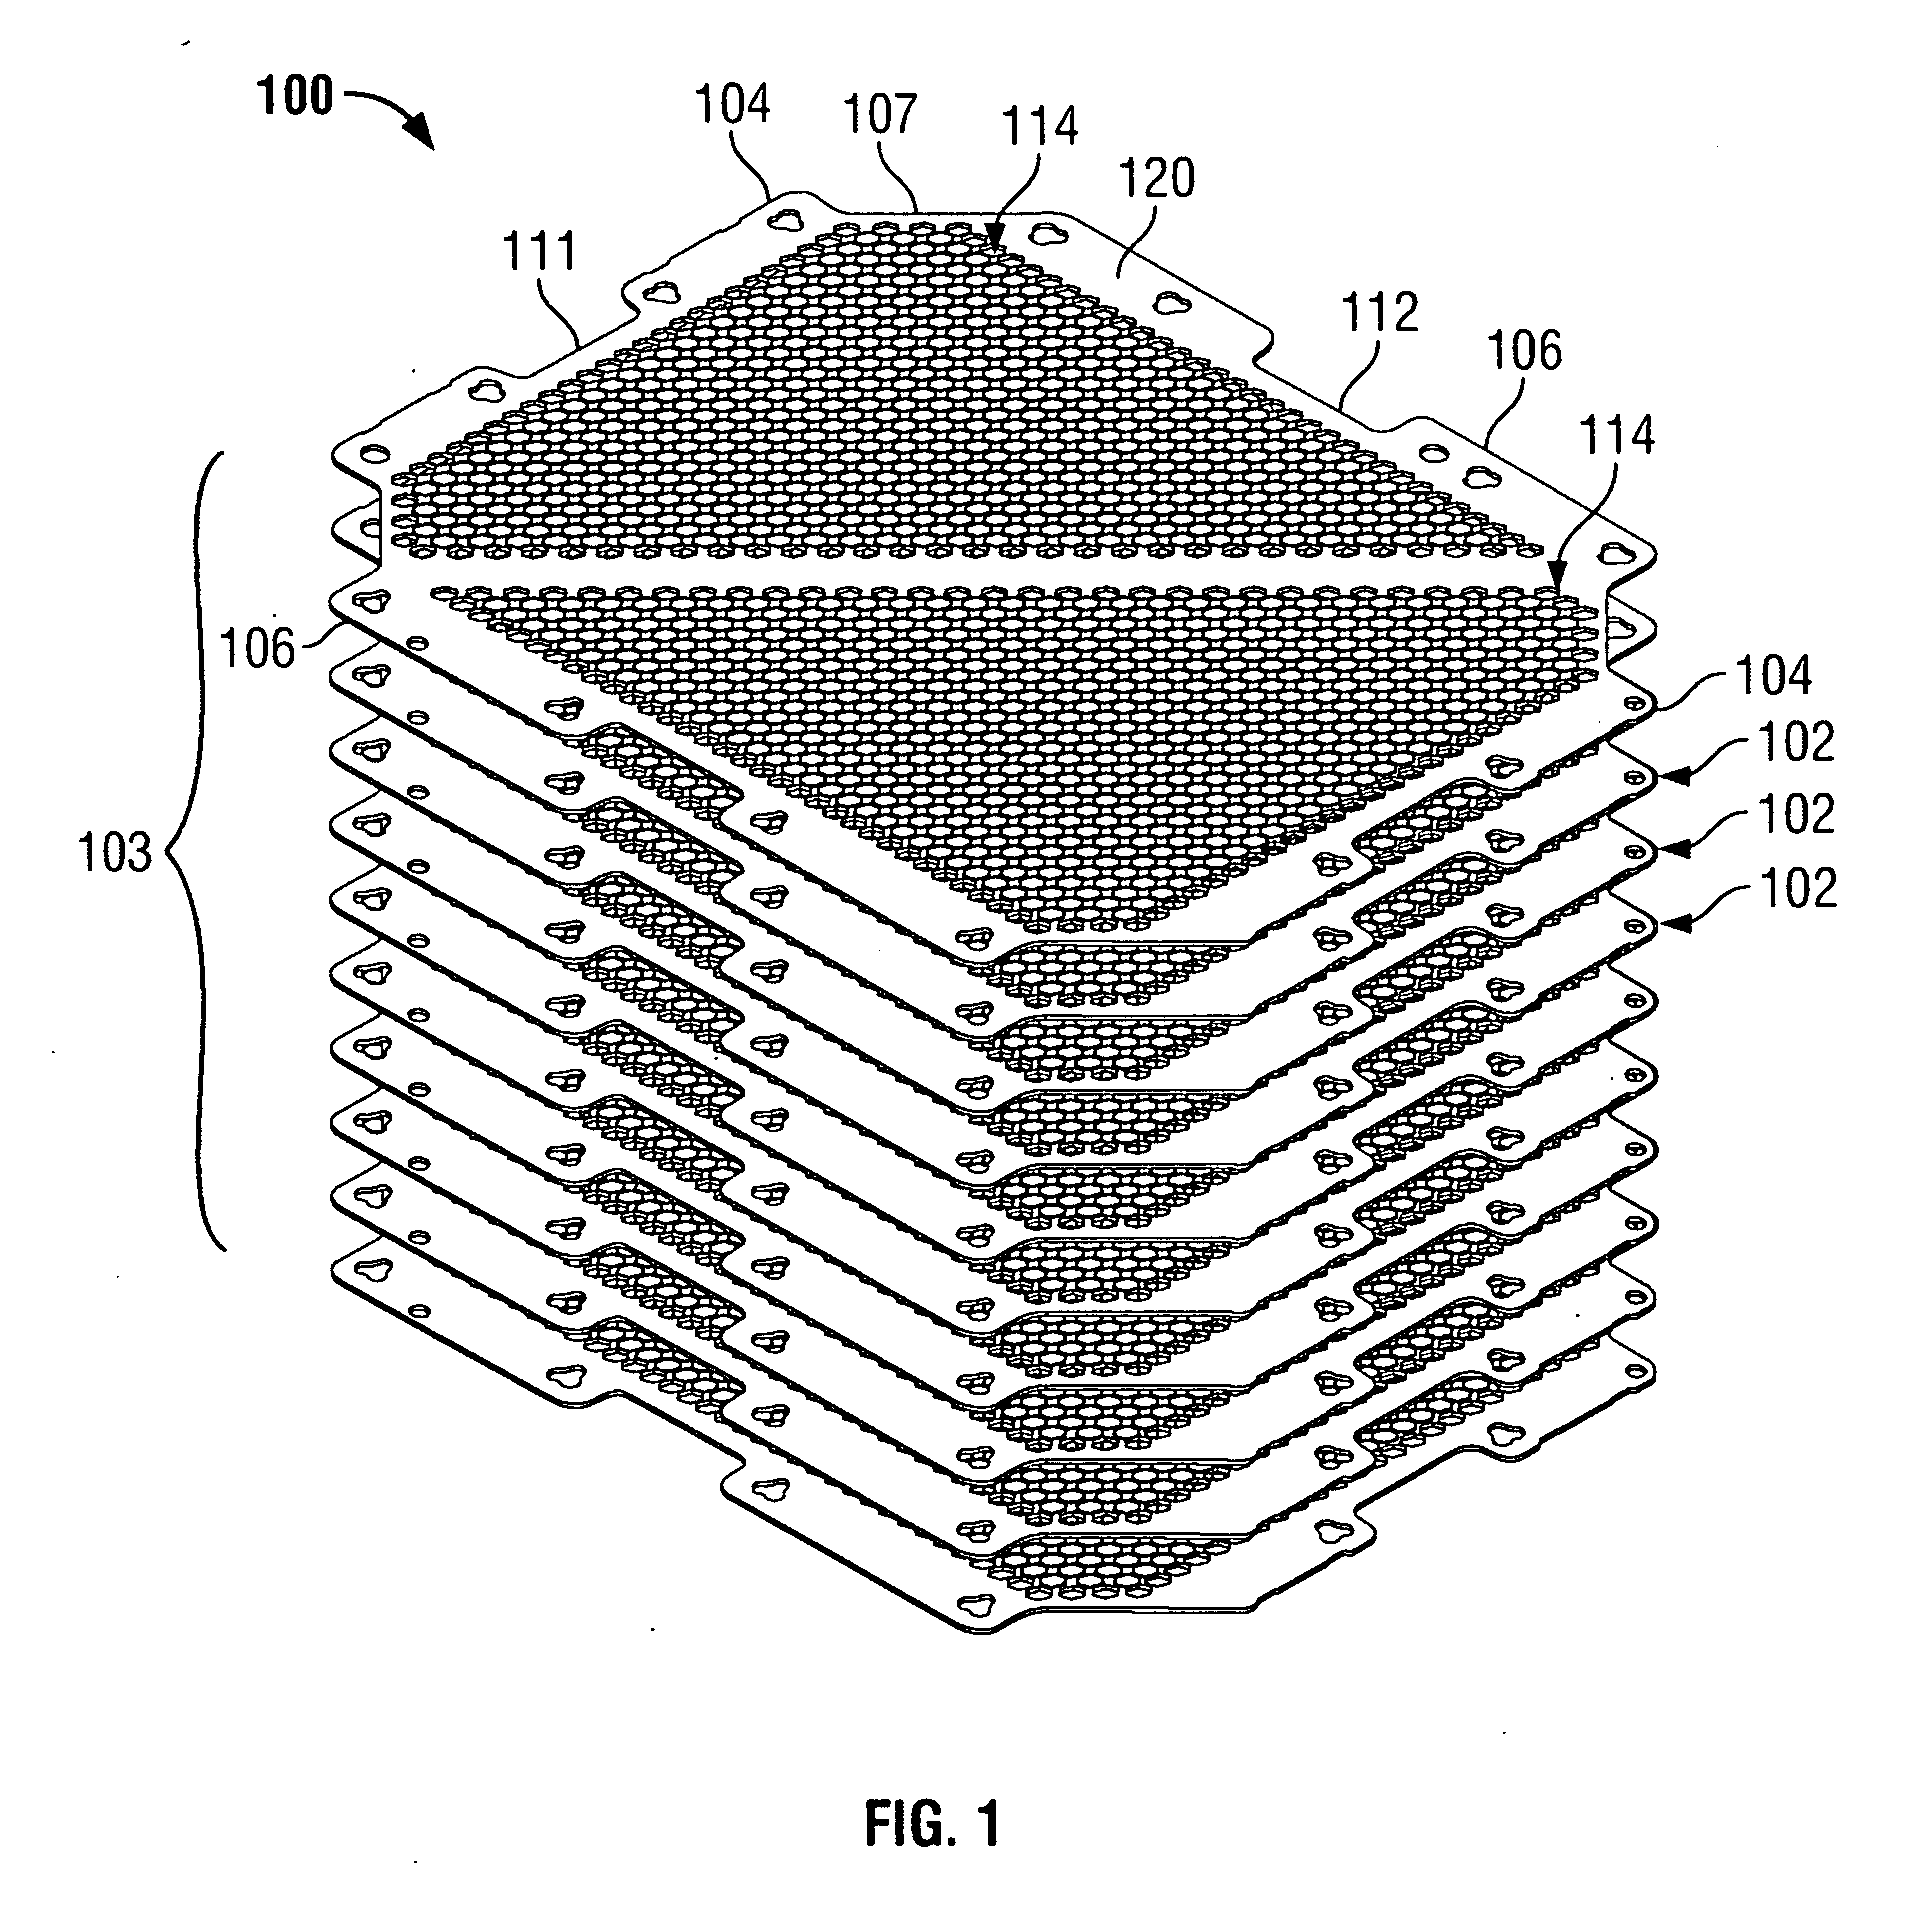 Bonded three dimensional metal laminate structure and method